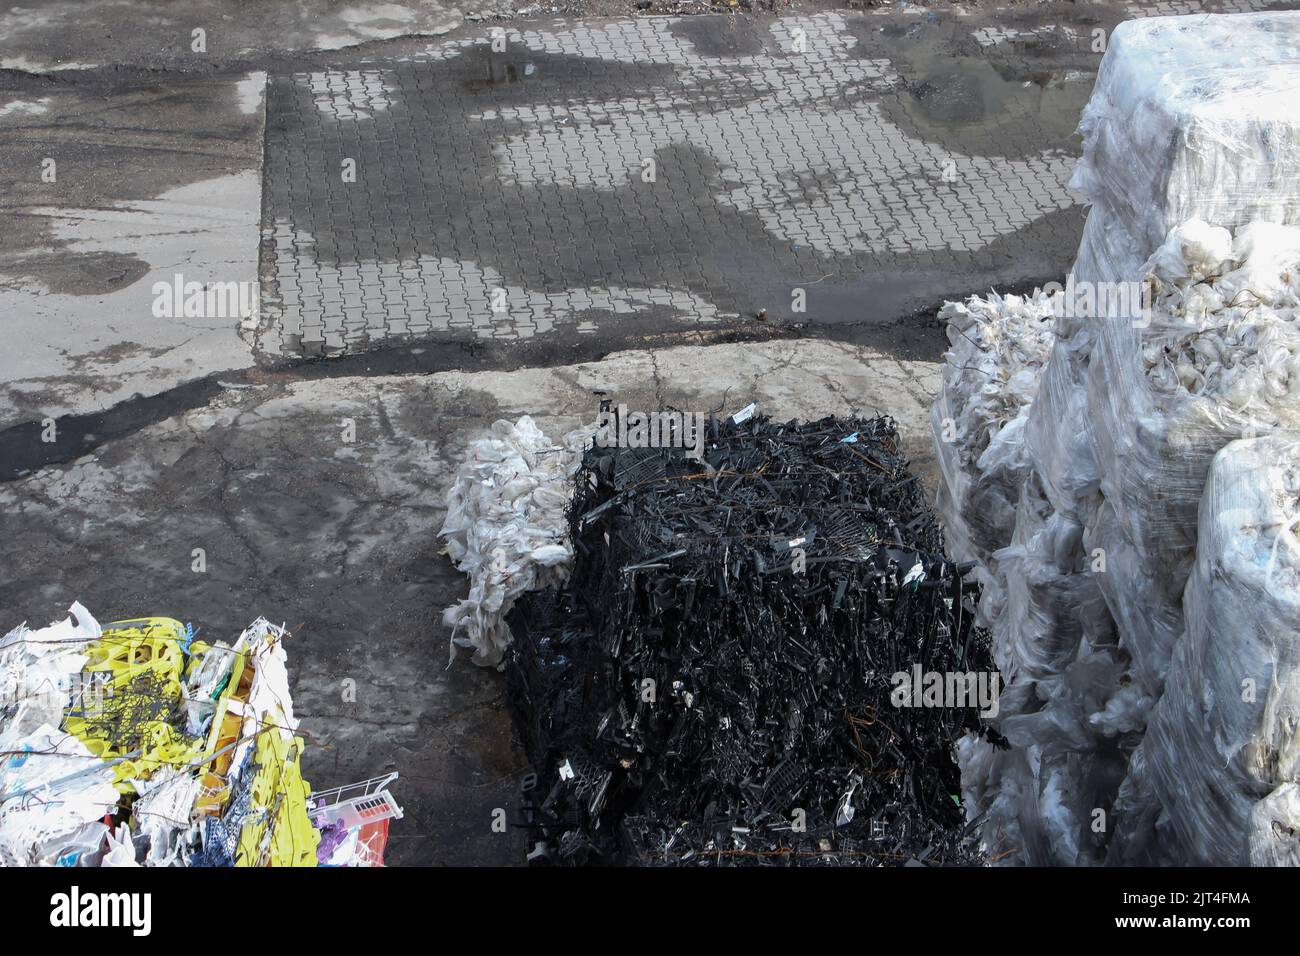 The outside of garbage disposal plant, Berlin, Germany. There are many cubes of garbage in image. Stock Photo